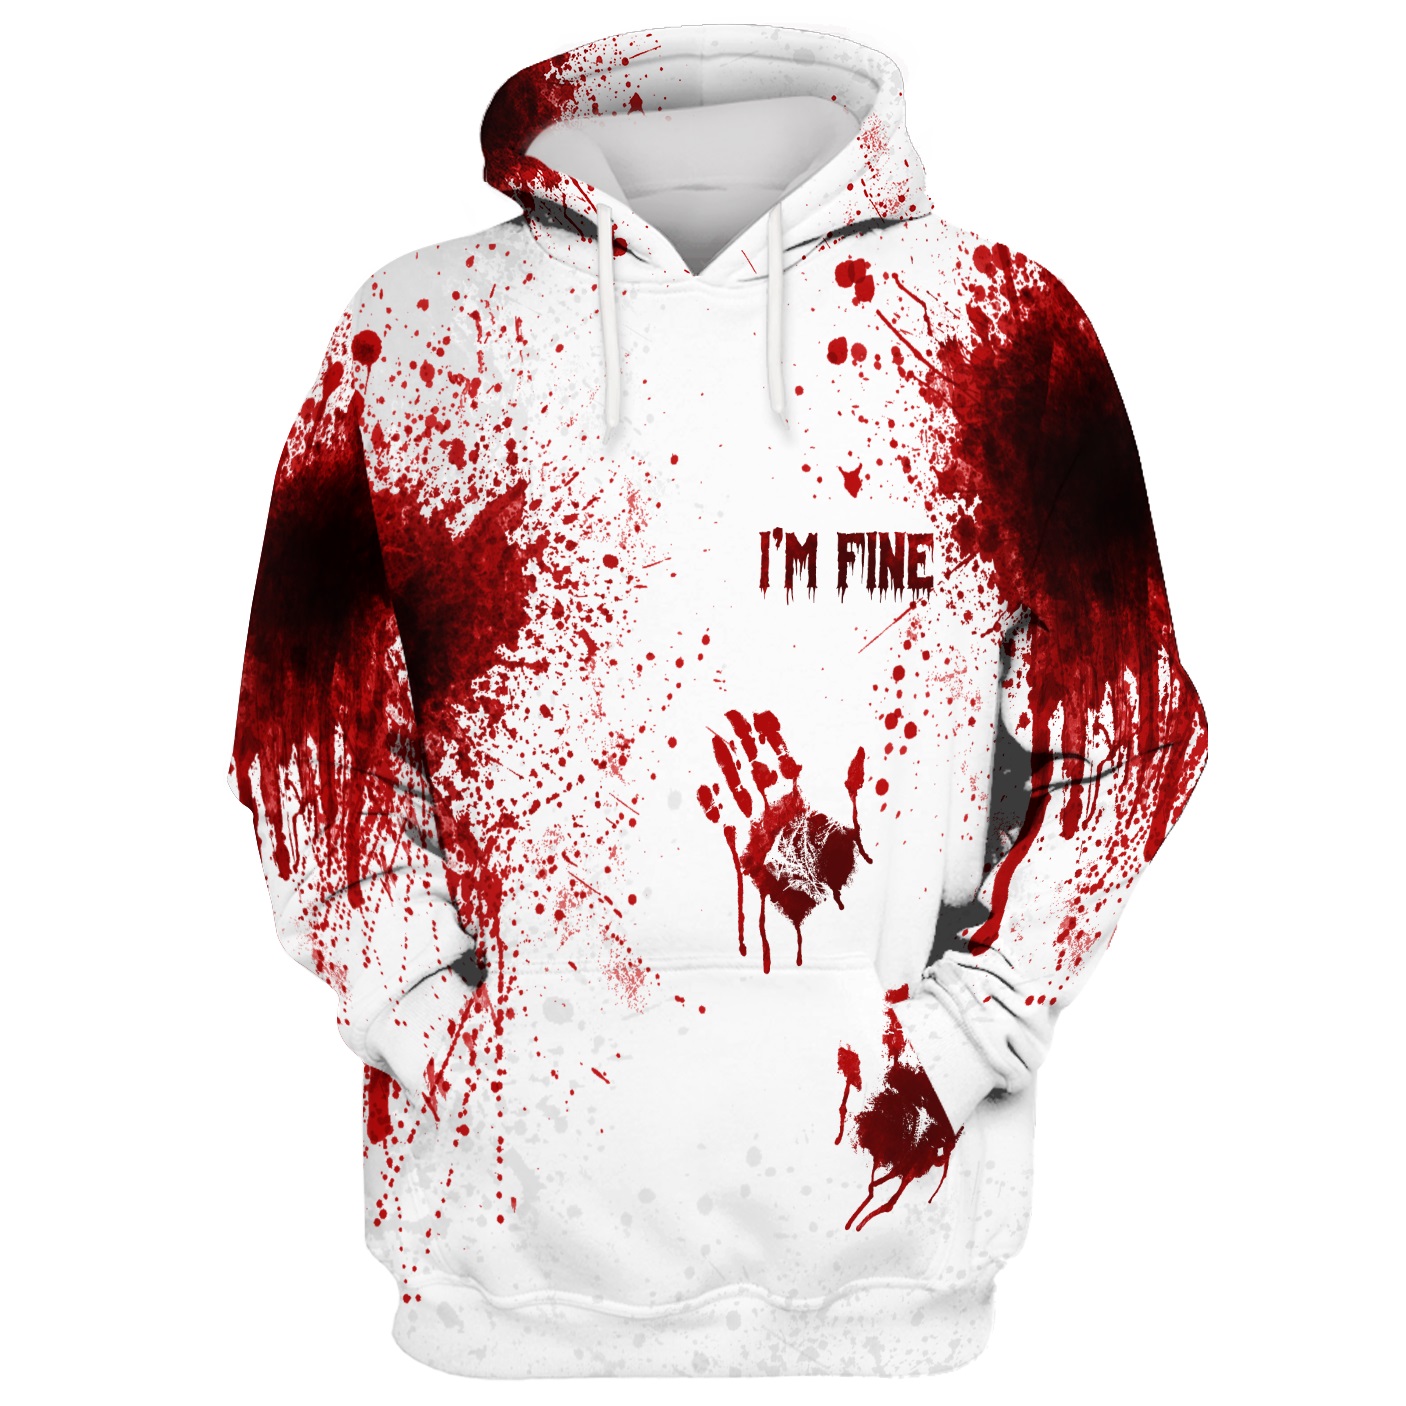 Halloween Blood I'm fine 3d hoodie and t-shirt - TH170921 (Copy)